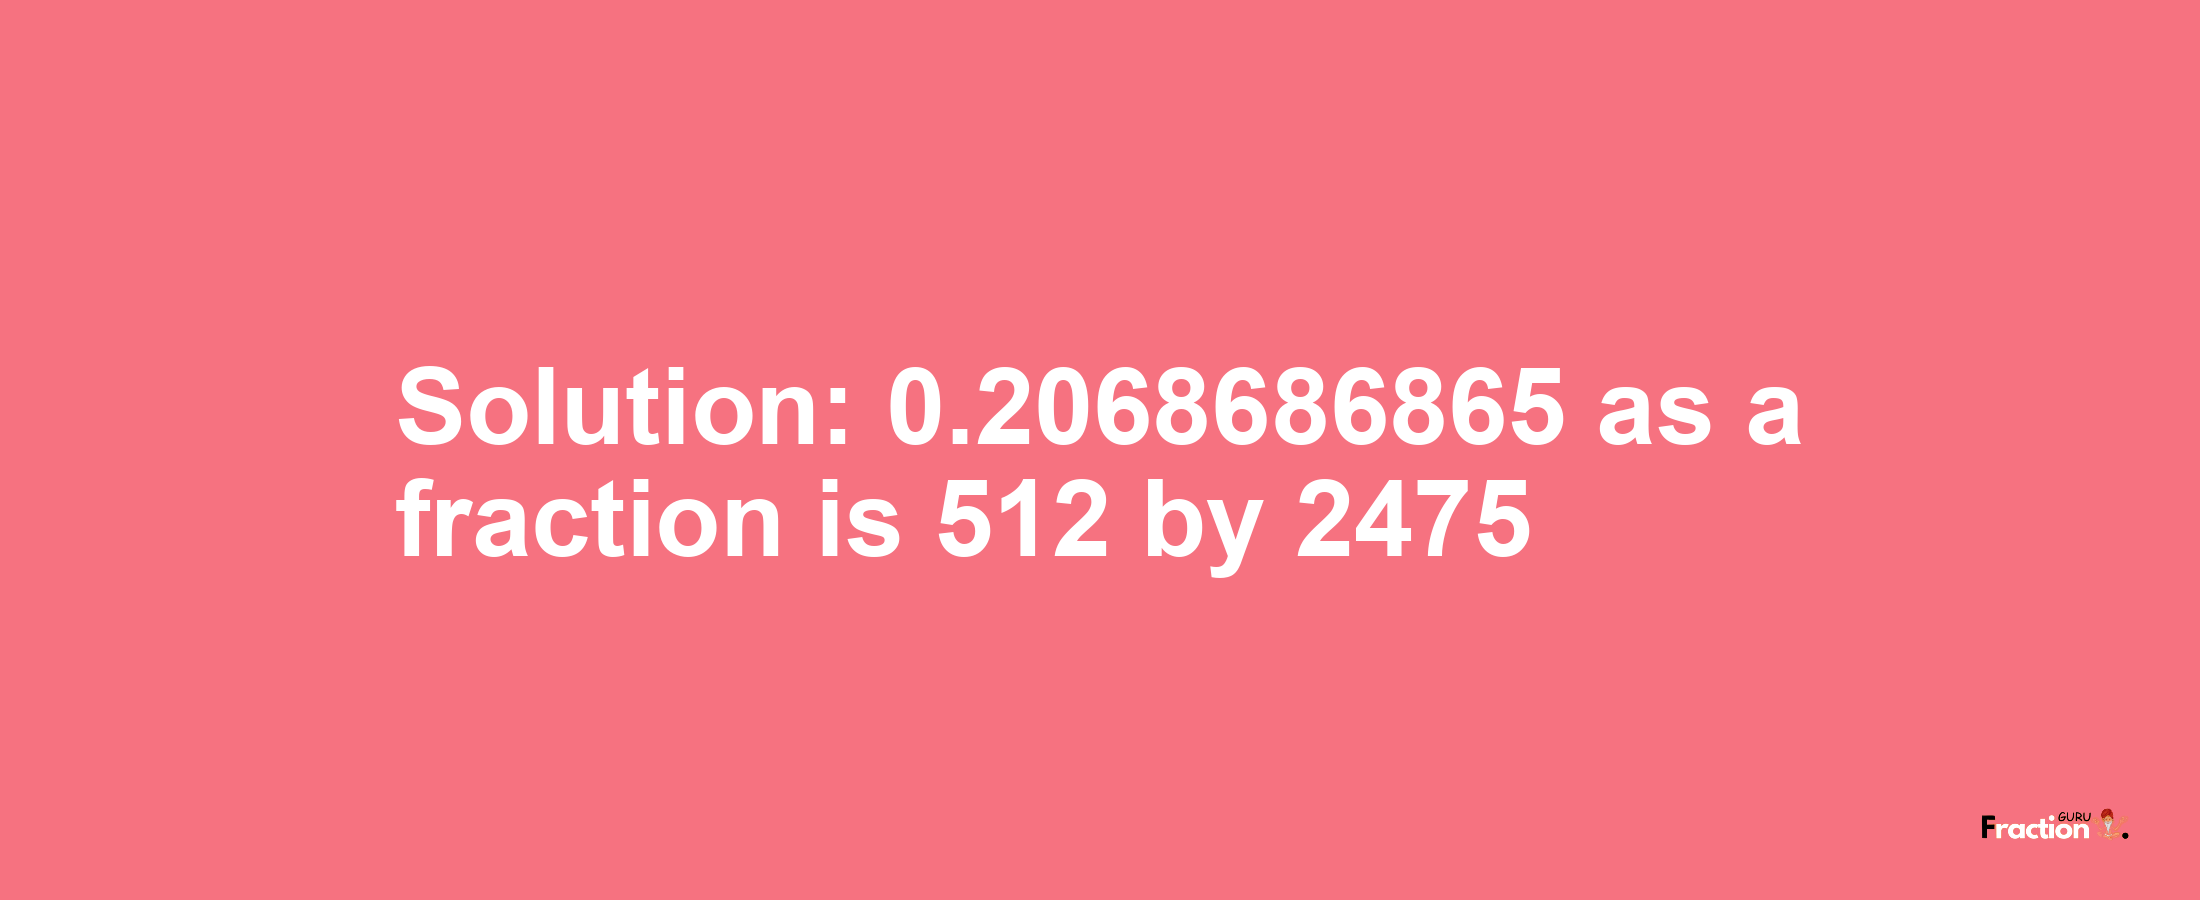 Solution:0.2068686865 as a fraction is 512/2475